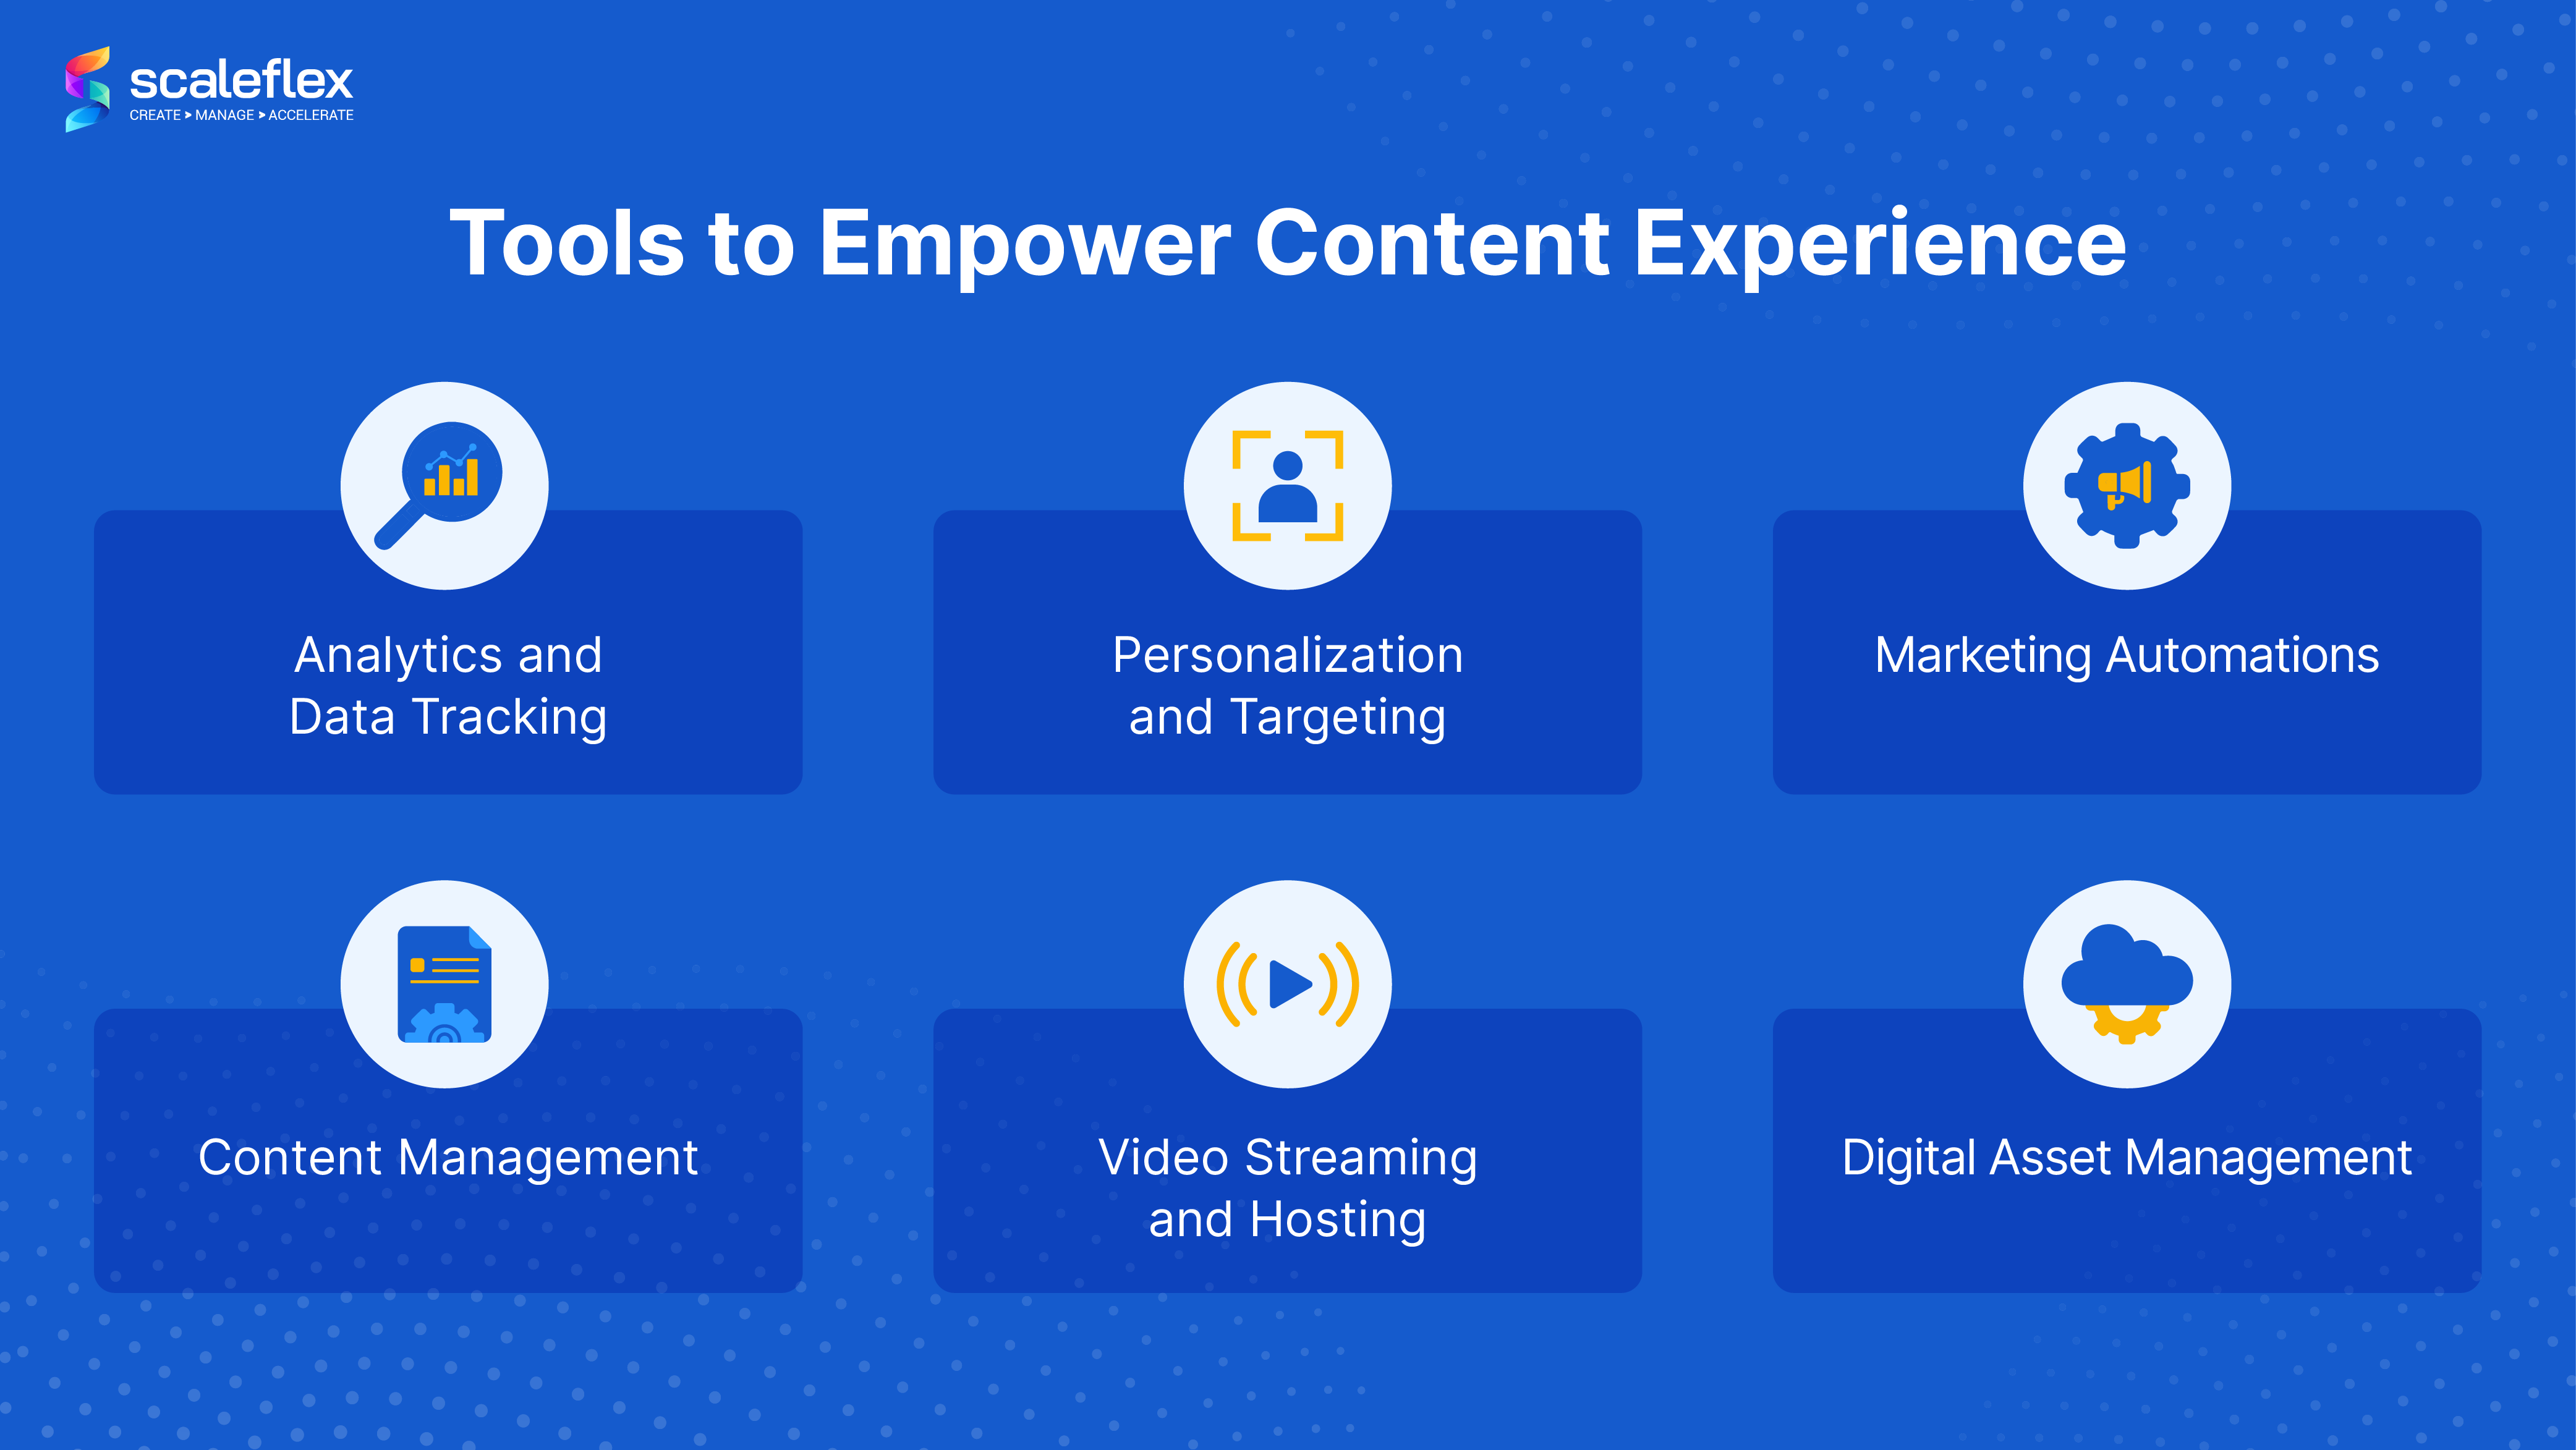 What are the tools to empower content experience?